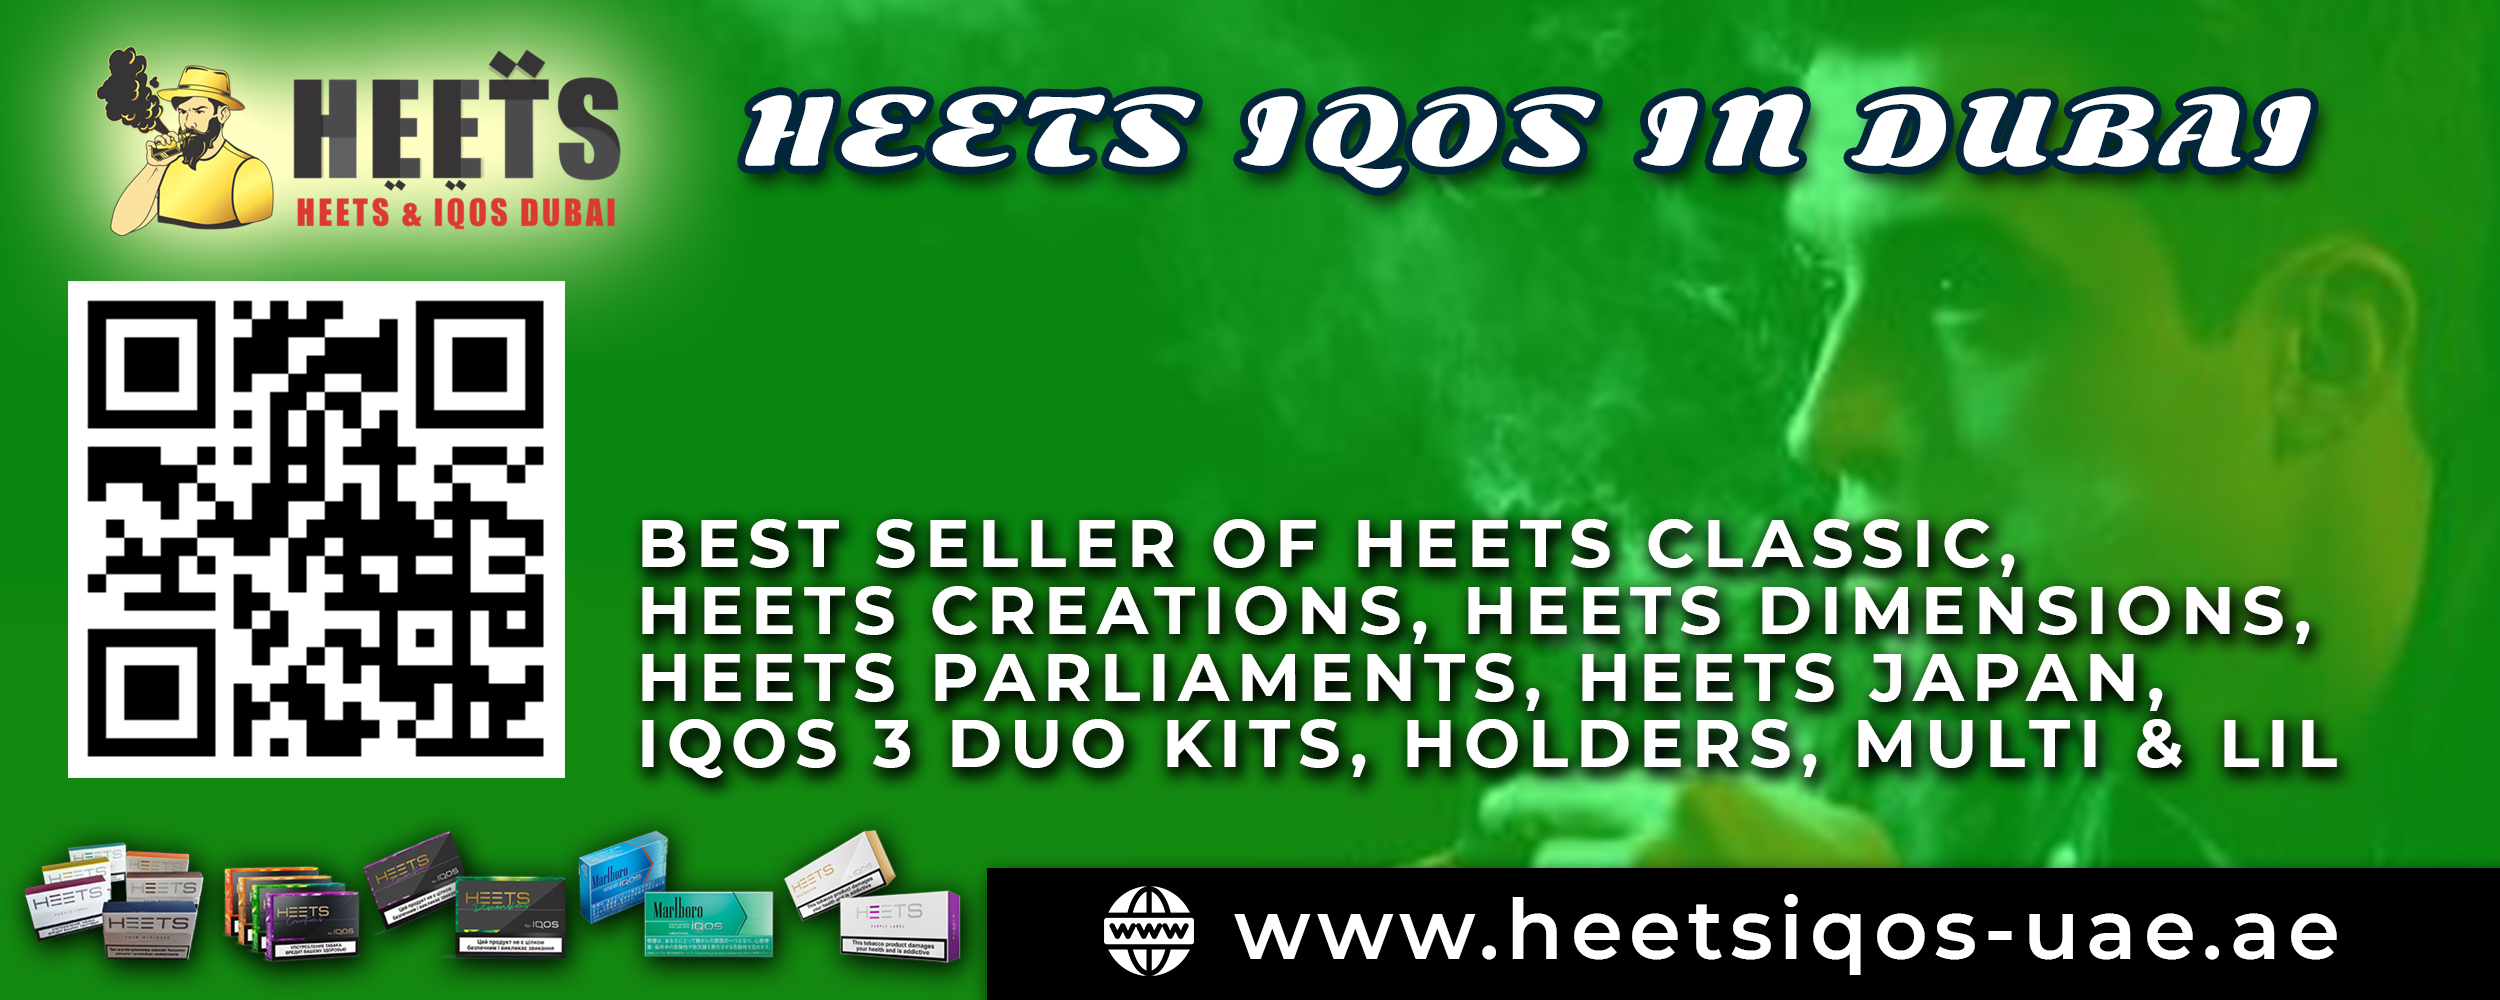 How to purchase IQOS HEETS DUBAI: